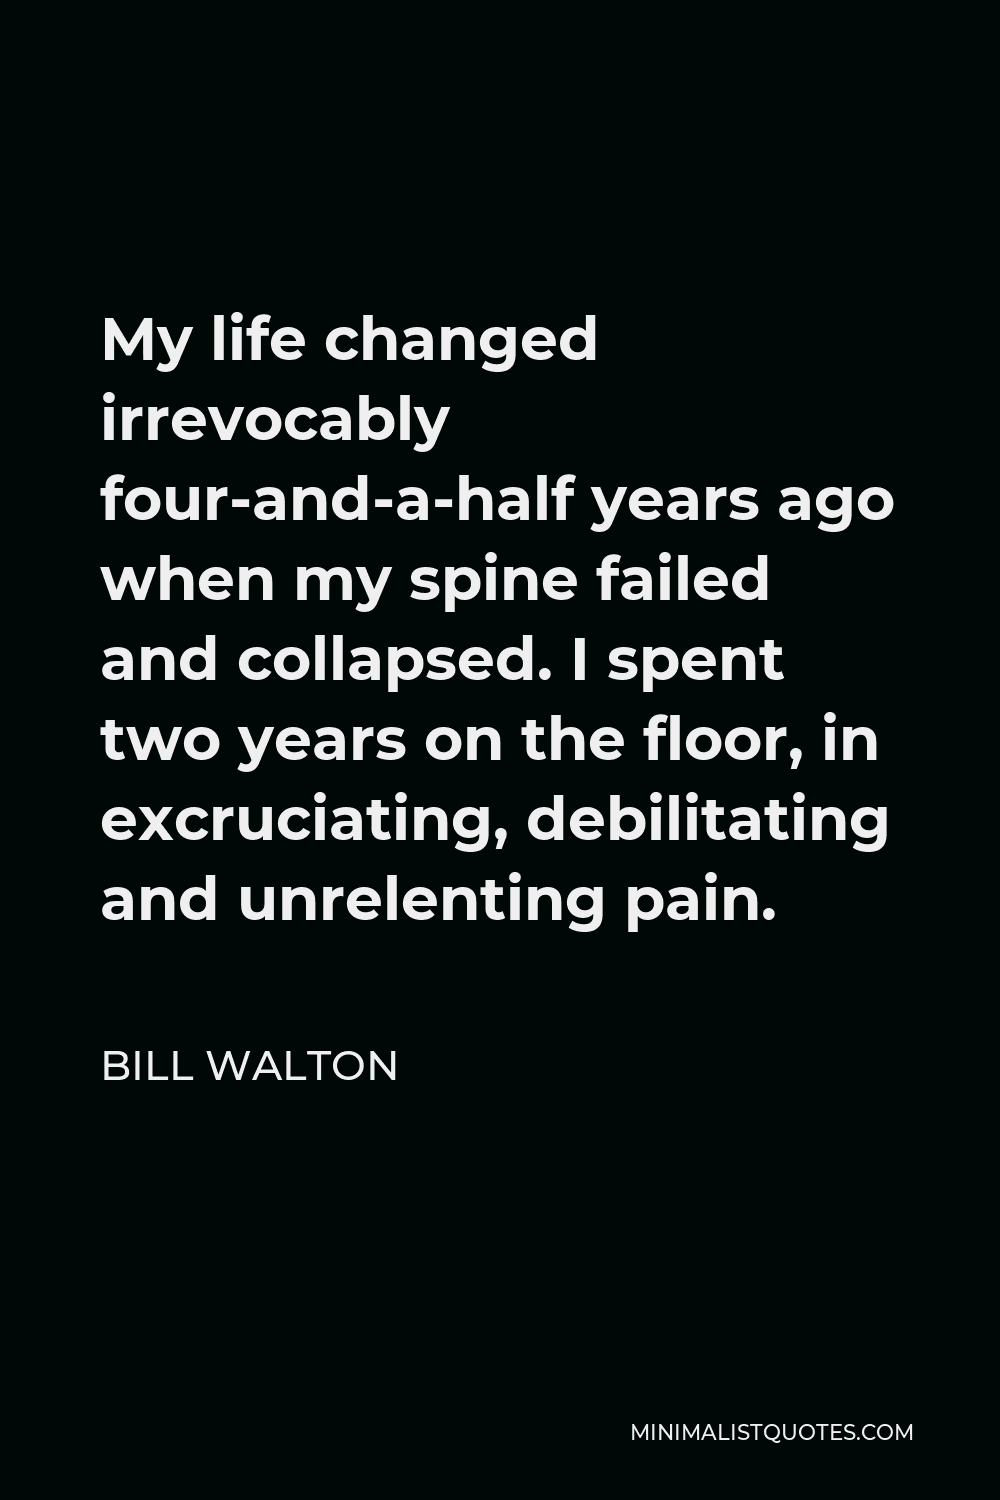 Bill Walton Quote - My life changed irrevocably four-and-a-half years ago when my spine failed and collapsed. I spent two years on the floor, in excruciating, debilitating and unrelenting pain.